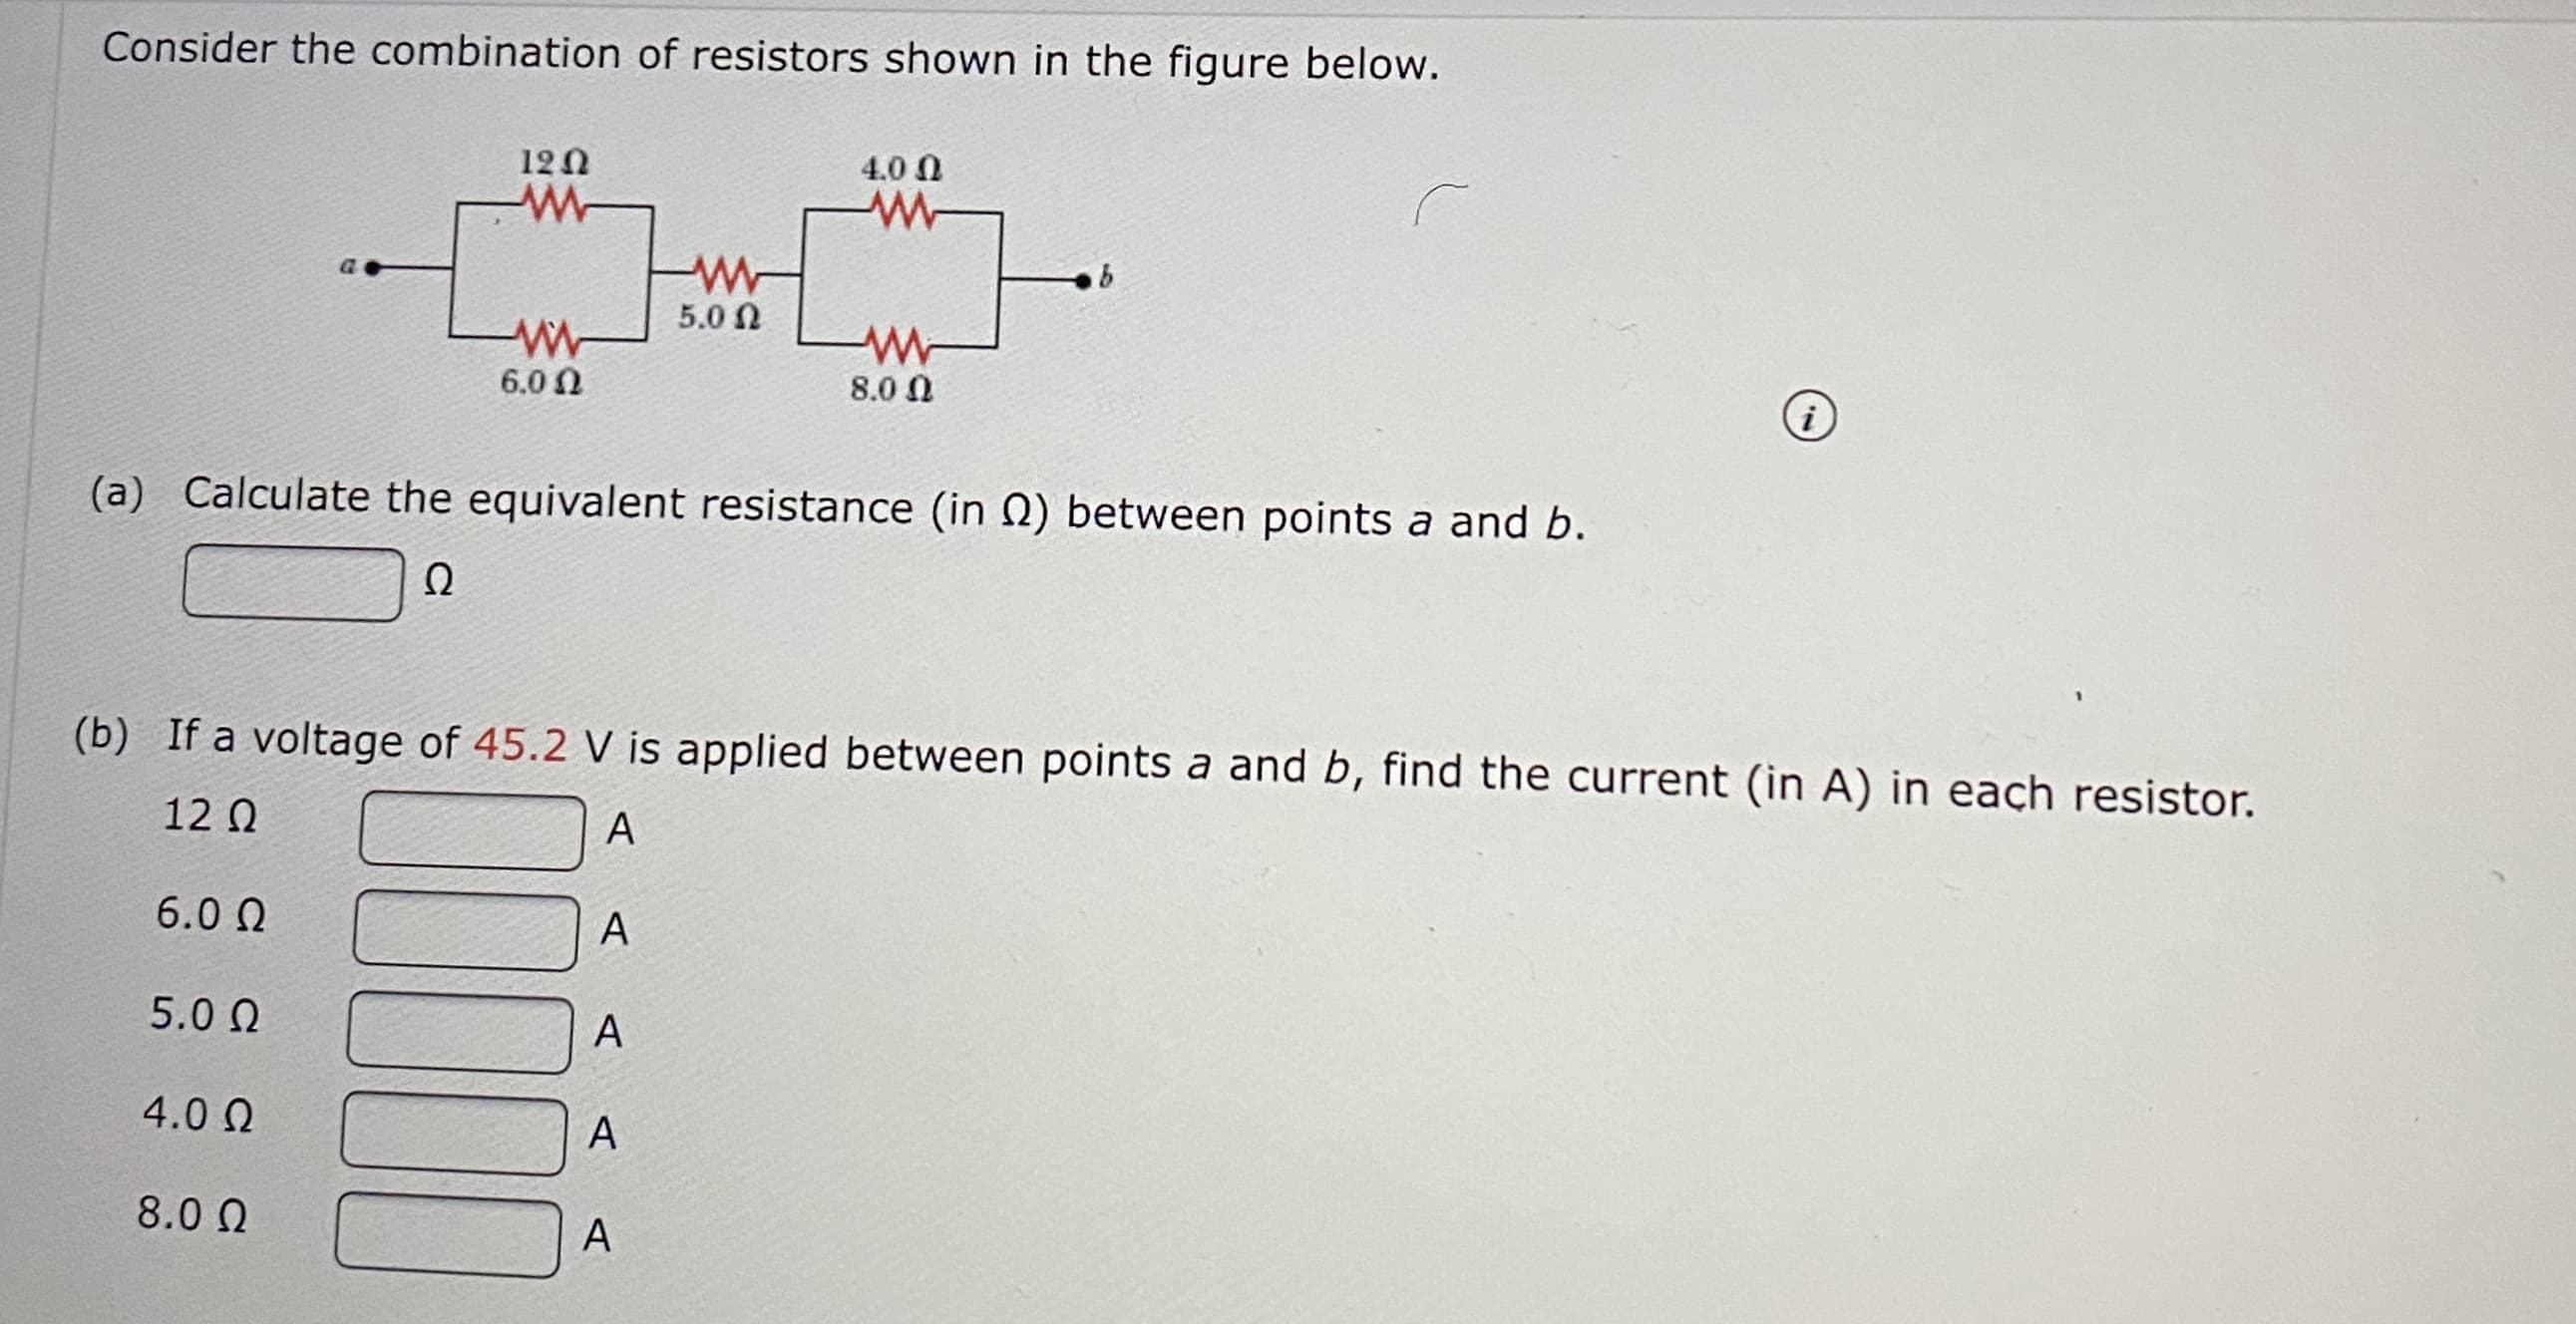 onsider the combination of resistors shown in the figure below.
120
4.0 0
5.0 N
6.0 N
8.0 N
(a) Calculate the equivalent resistance (in N) between points a and b.
Ω
(b) If a voltage of 45.2 V is applied between points a and b, find the current (in A) in each resistor.
12 Q
A
6.0 N
5.0 0
A
4.0 N
A
8.0 0
A
